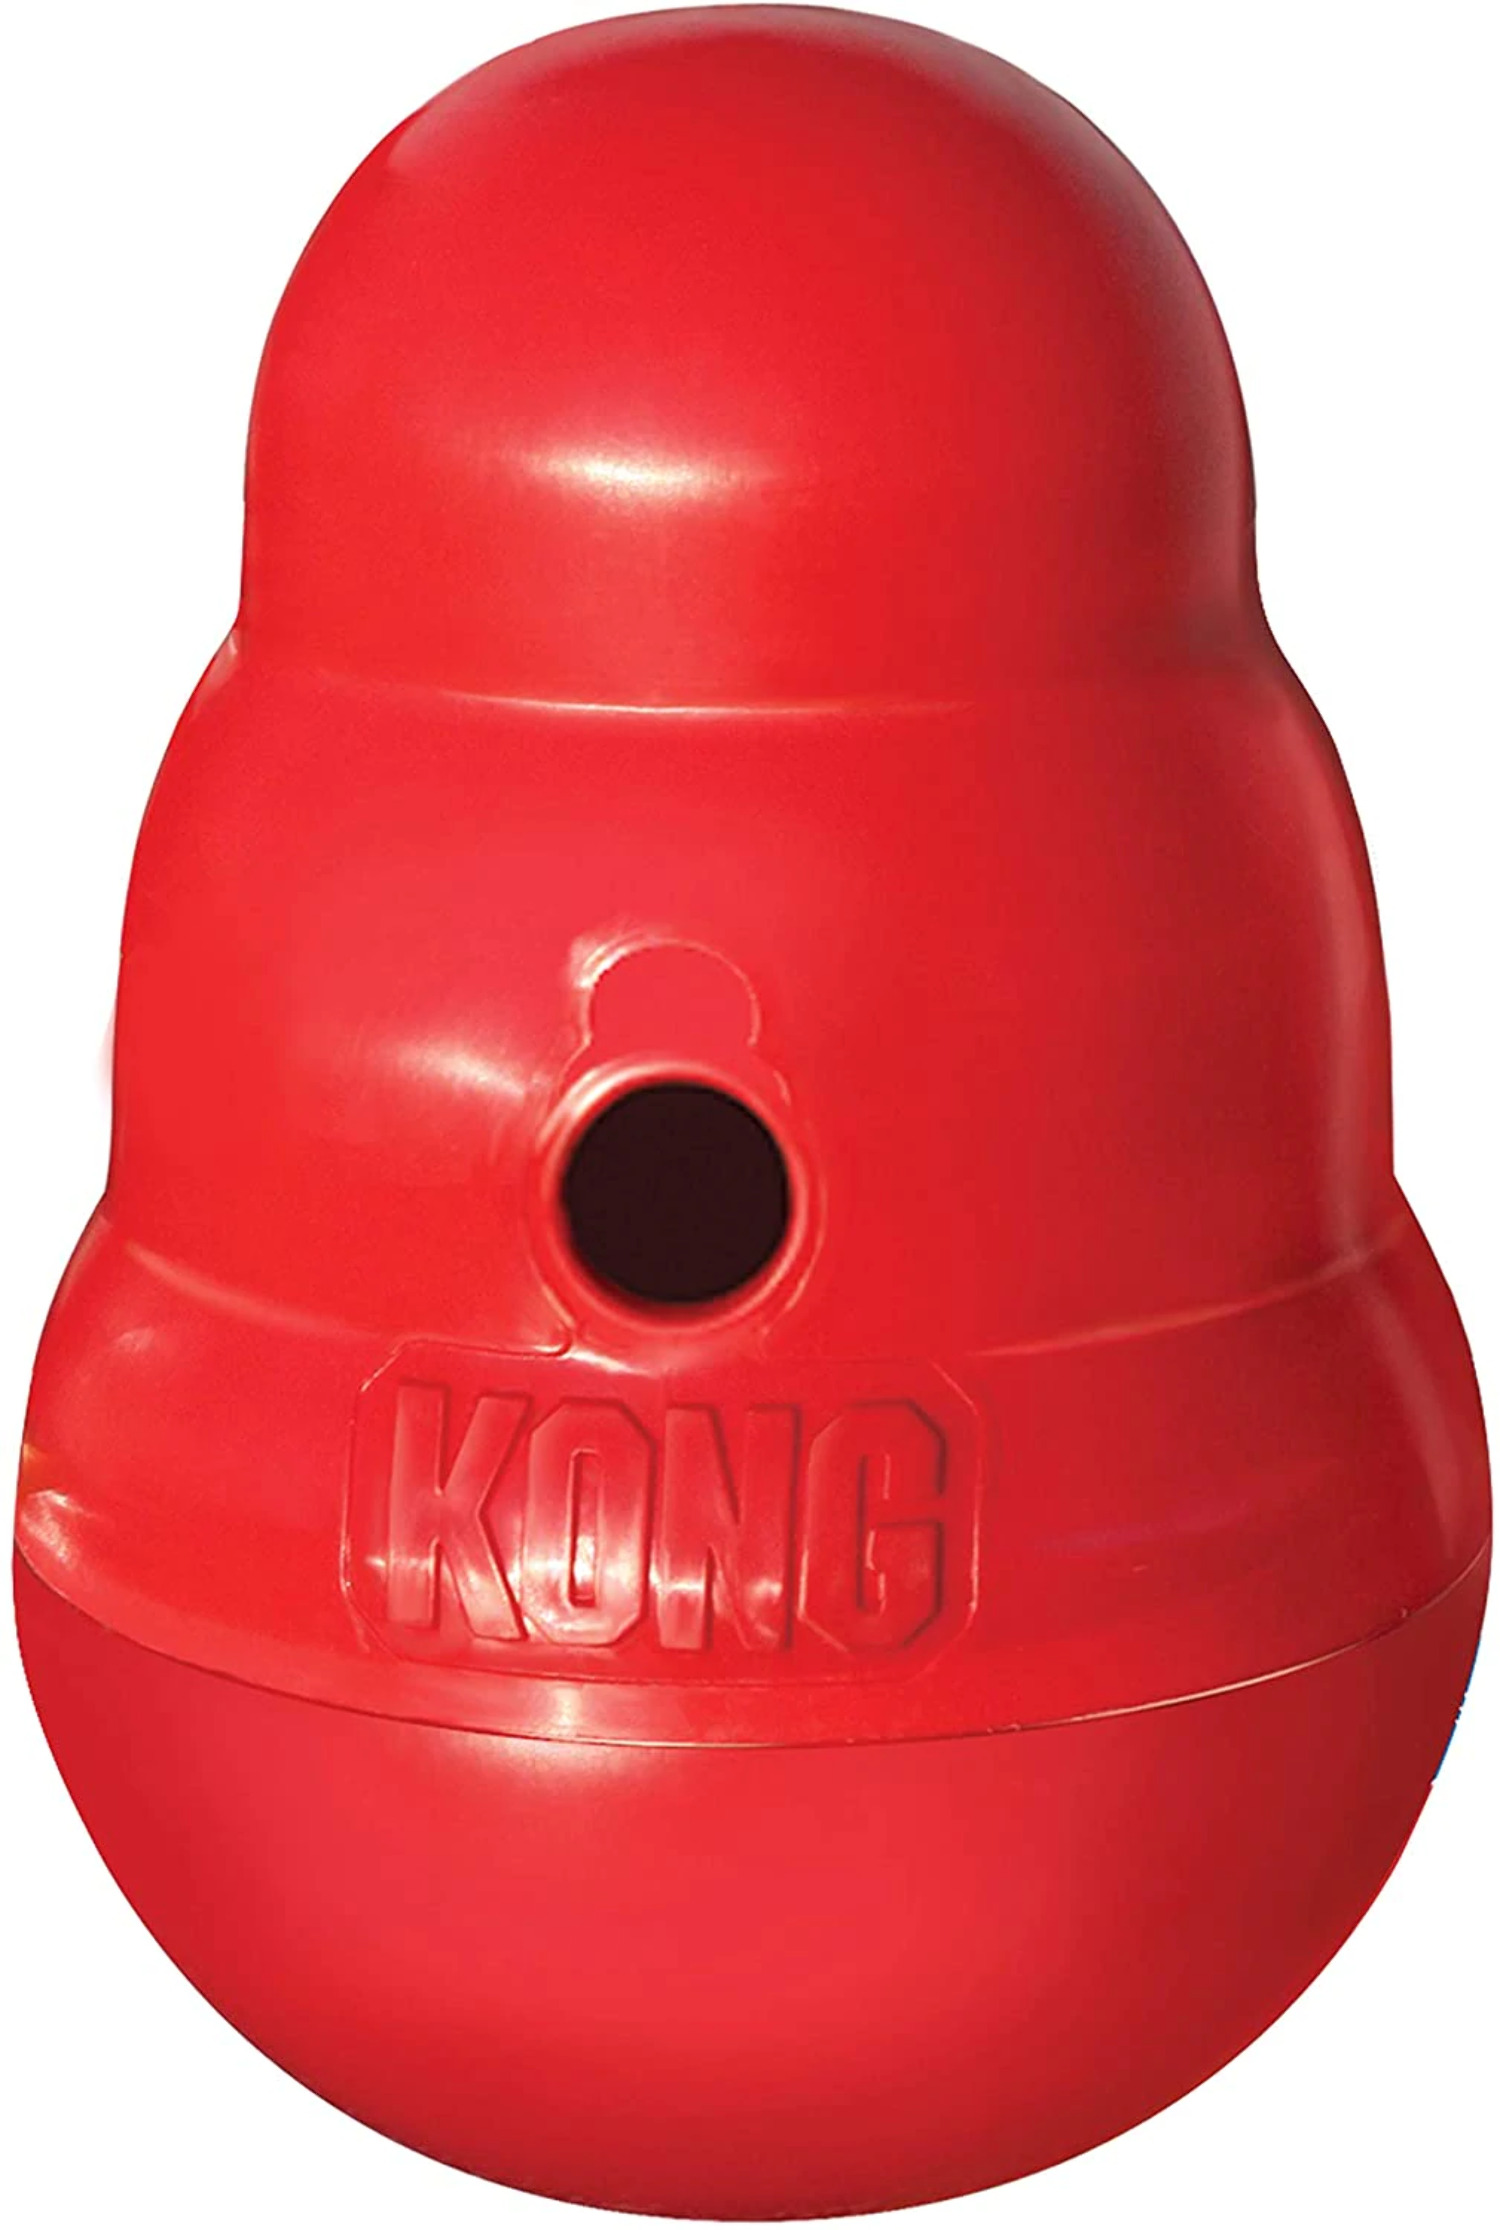 KONG Wobbler Food and Treat Dispenser Dog Toy Red - image 1 of 2